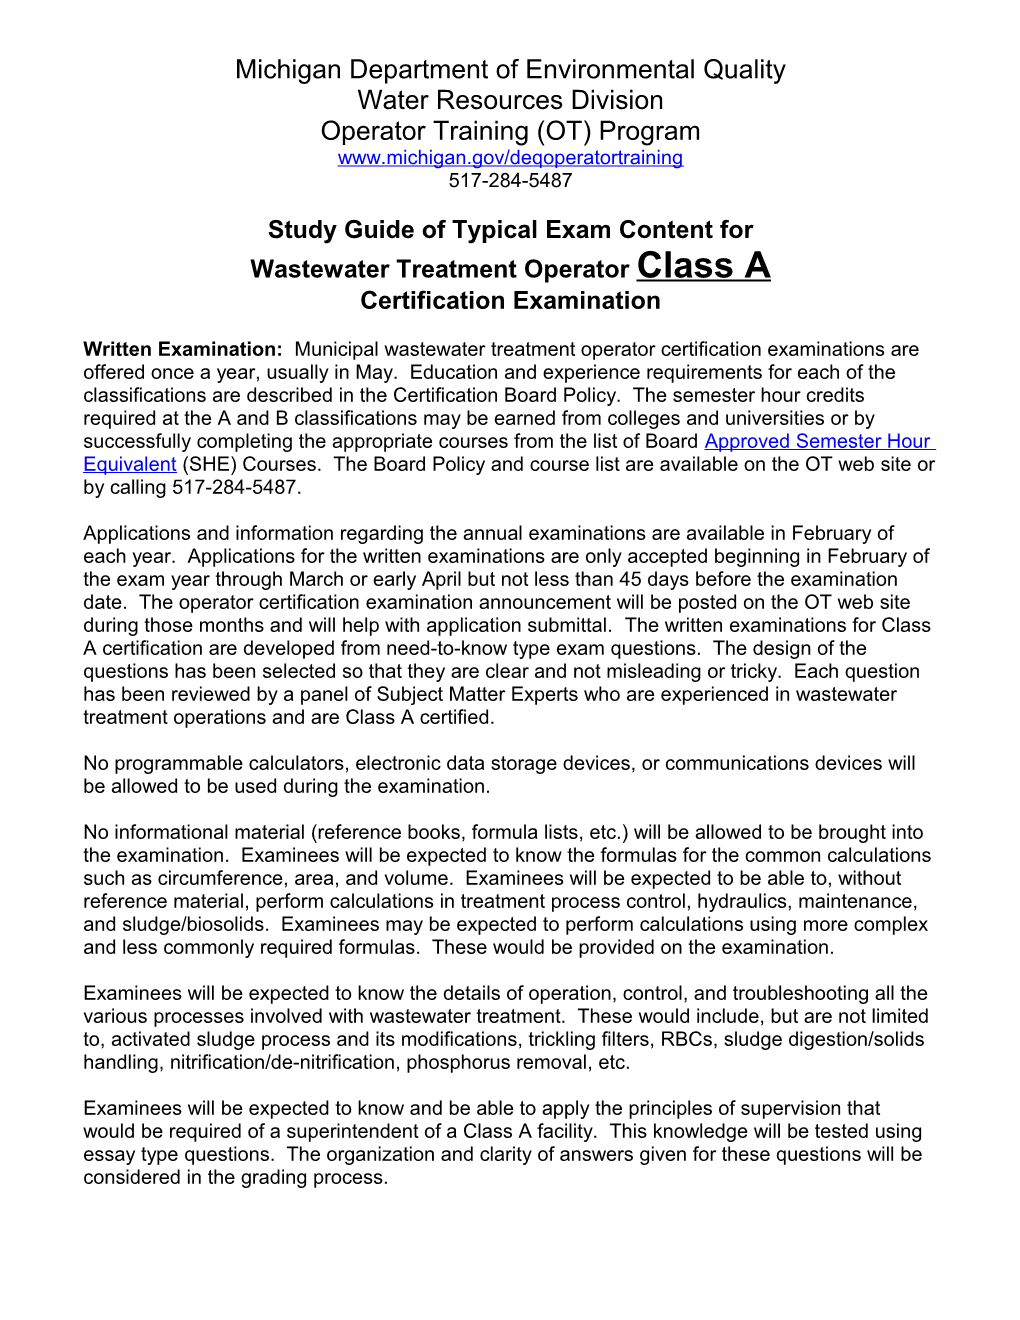 Study Guide of Typical Exam Content for Wastewater Treatment Operator Class a Certification